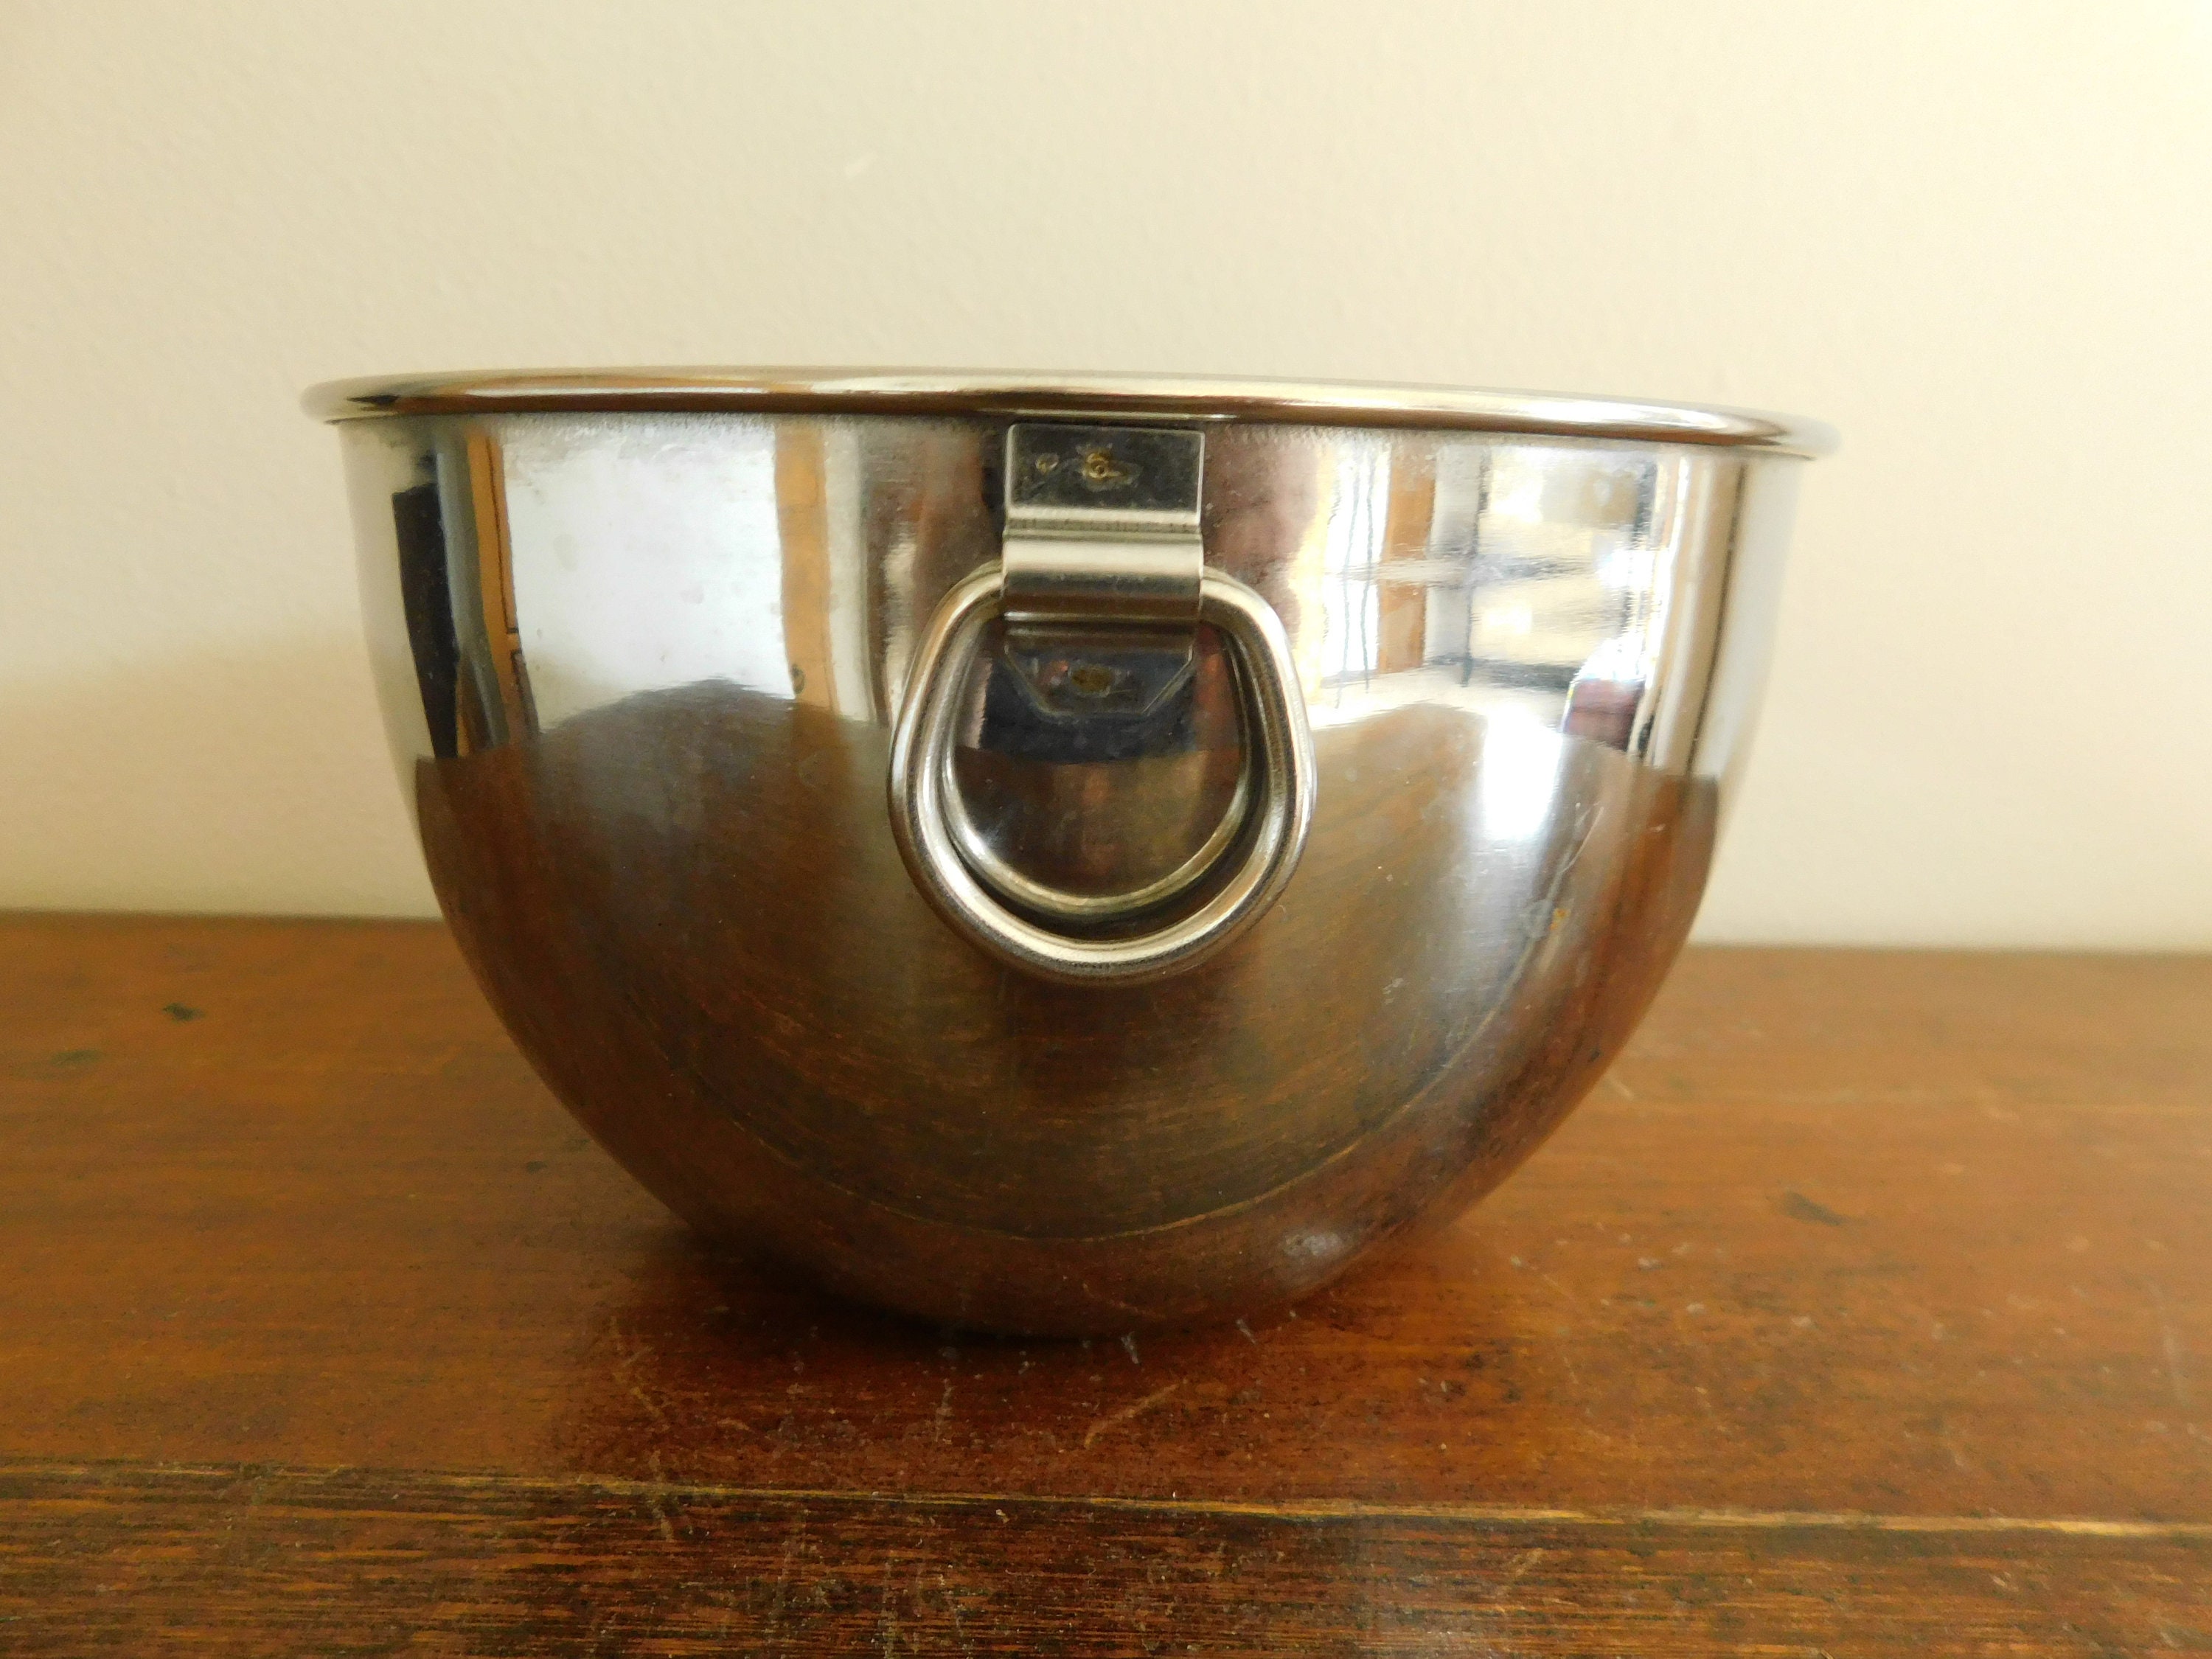 Revere Ware mixing bowl set. Not sure if it's vintage or not, but I know  it's awesome to find a set with lids intact! $8! : r/ThriftStoreHauls